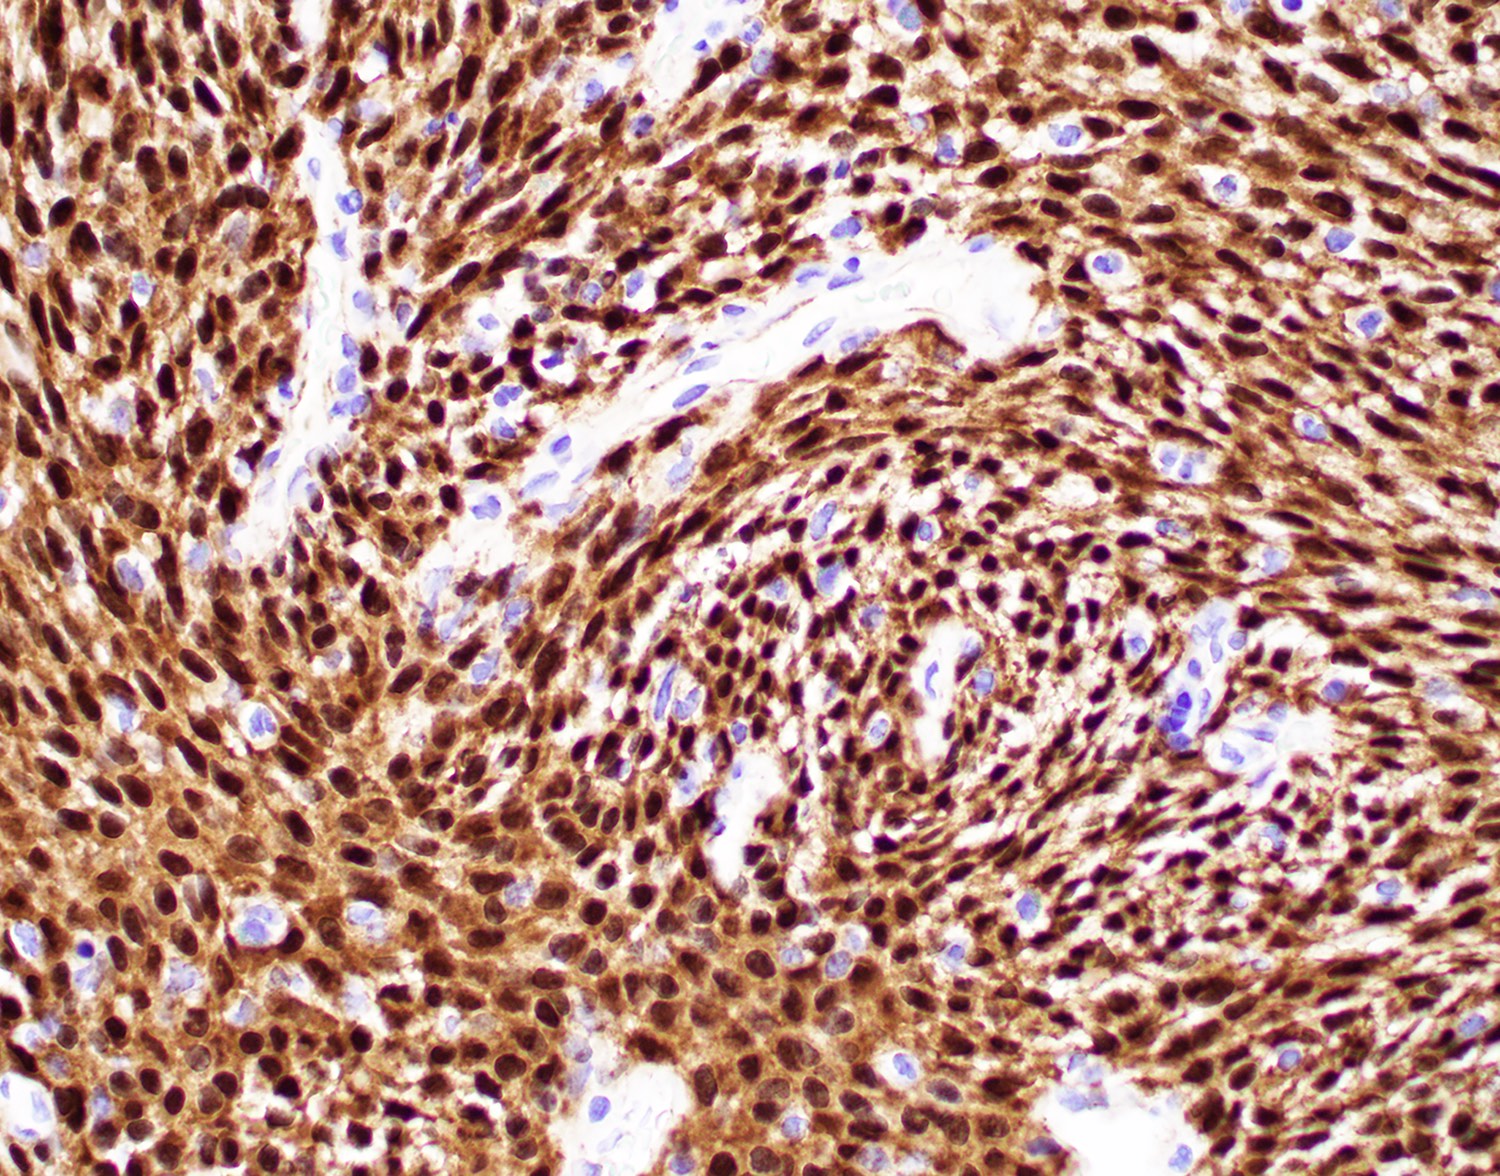 Beta catenin nuclear staining